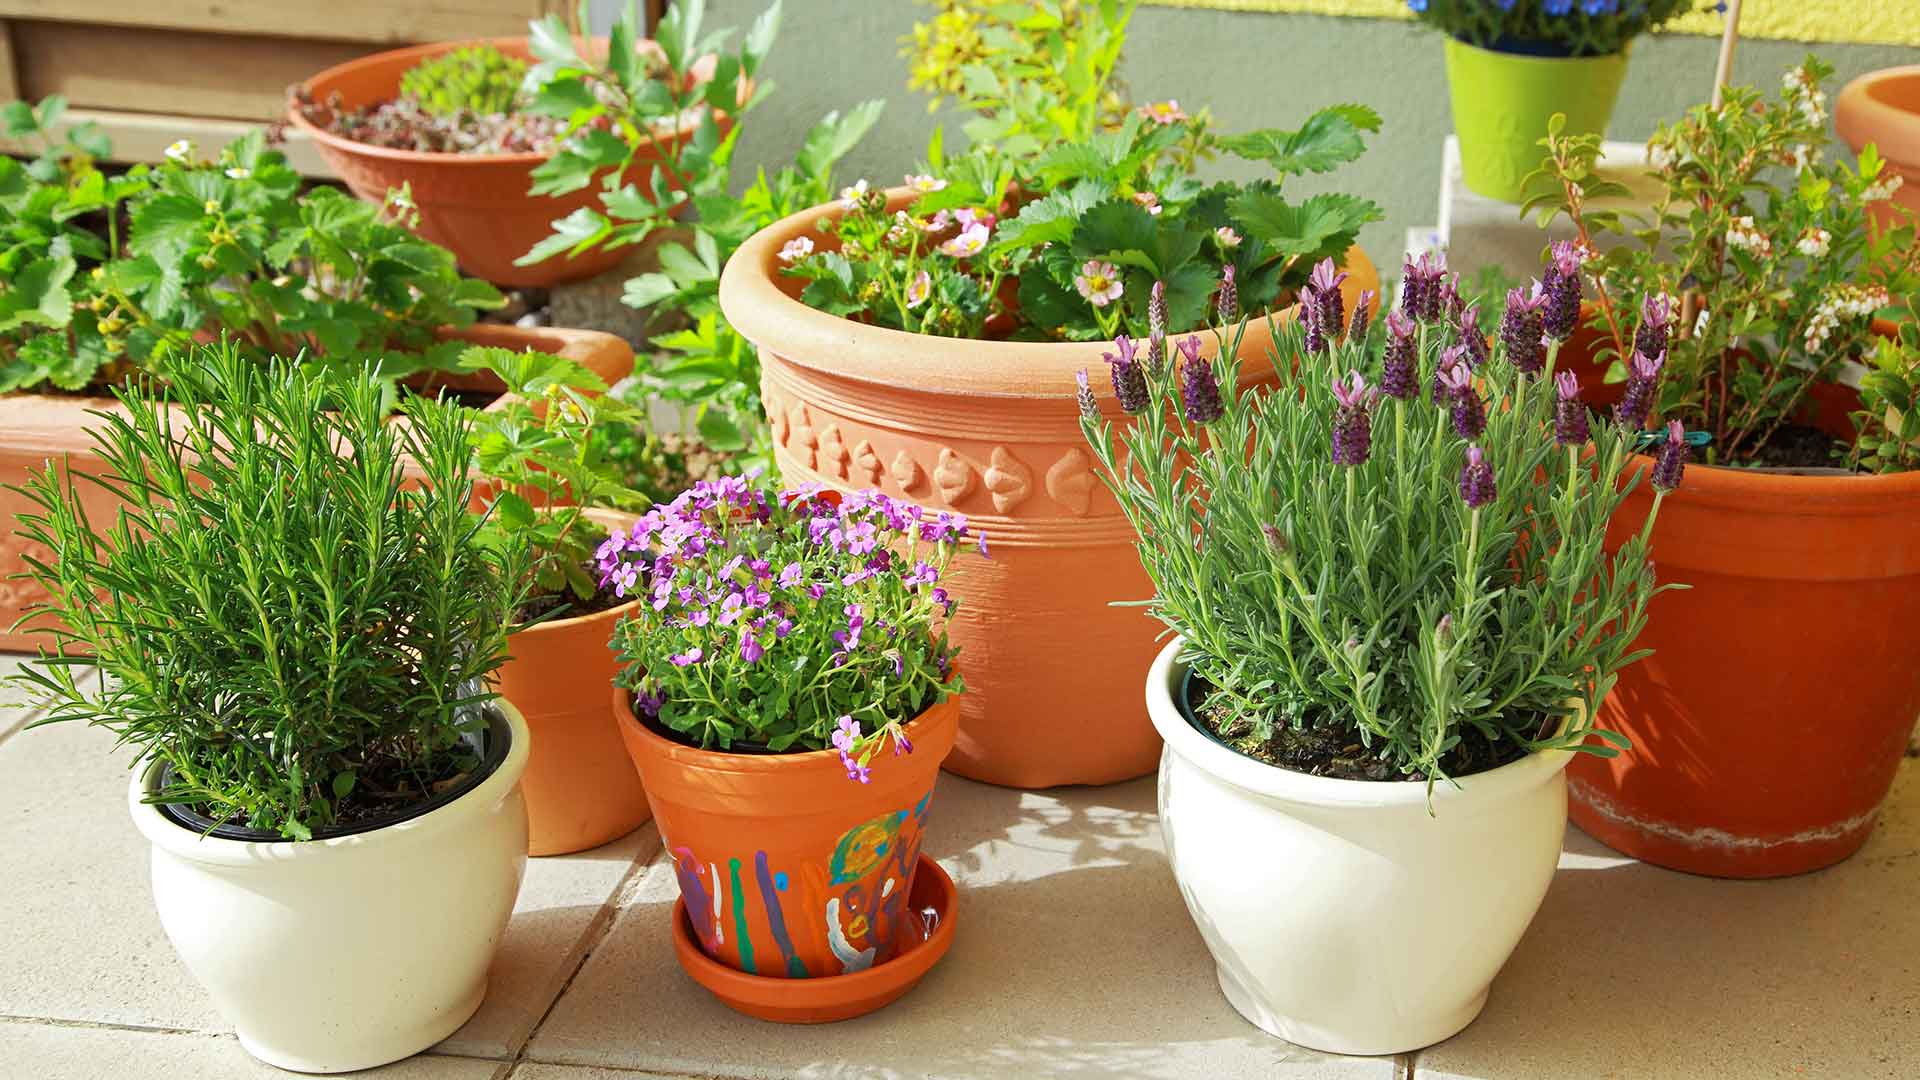 To Grow Flowers In Pots, How To Plant Flowers In Pots Outdoors